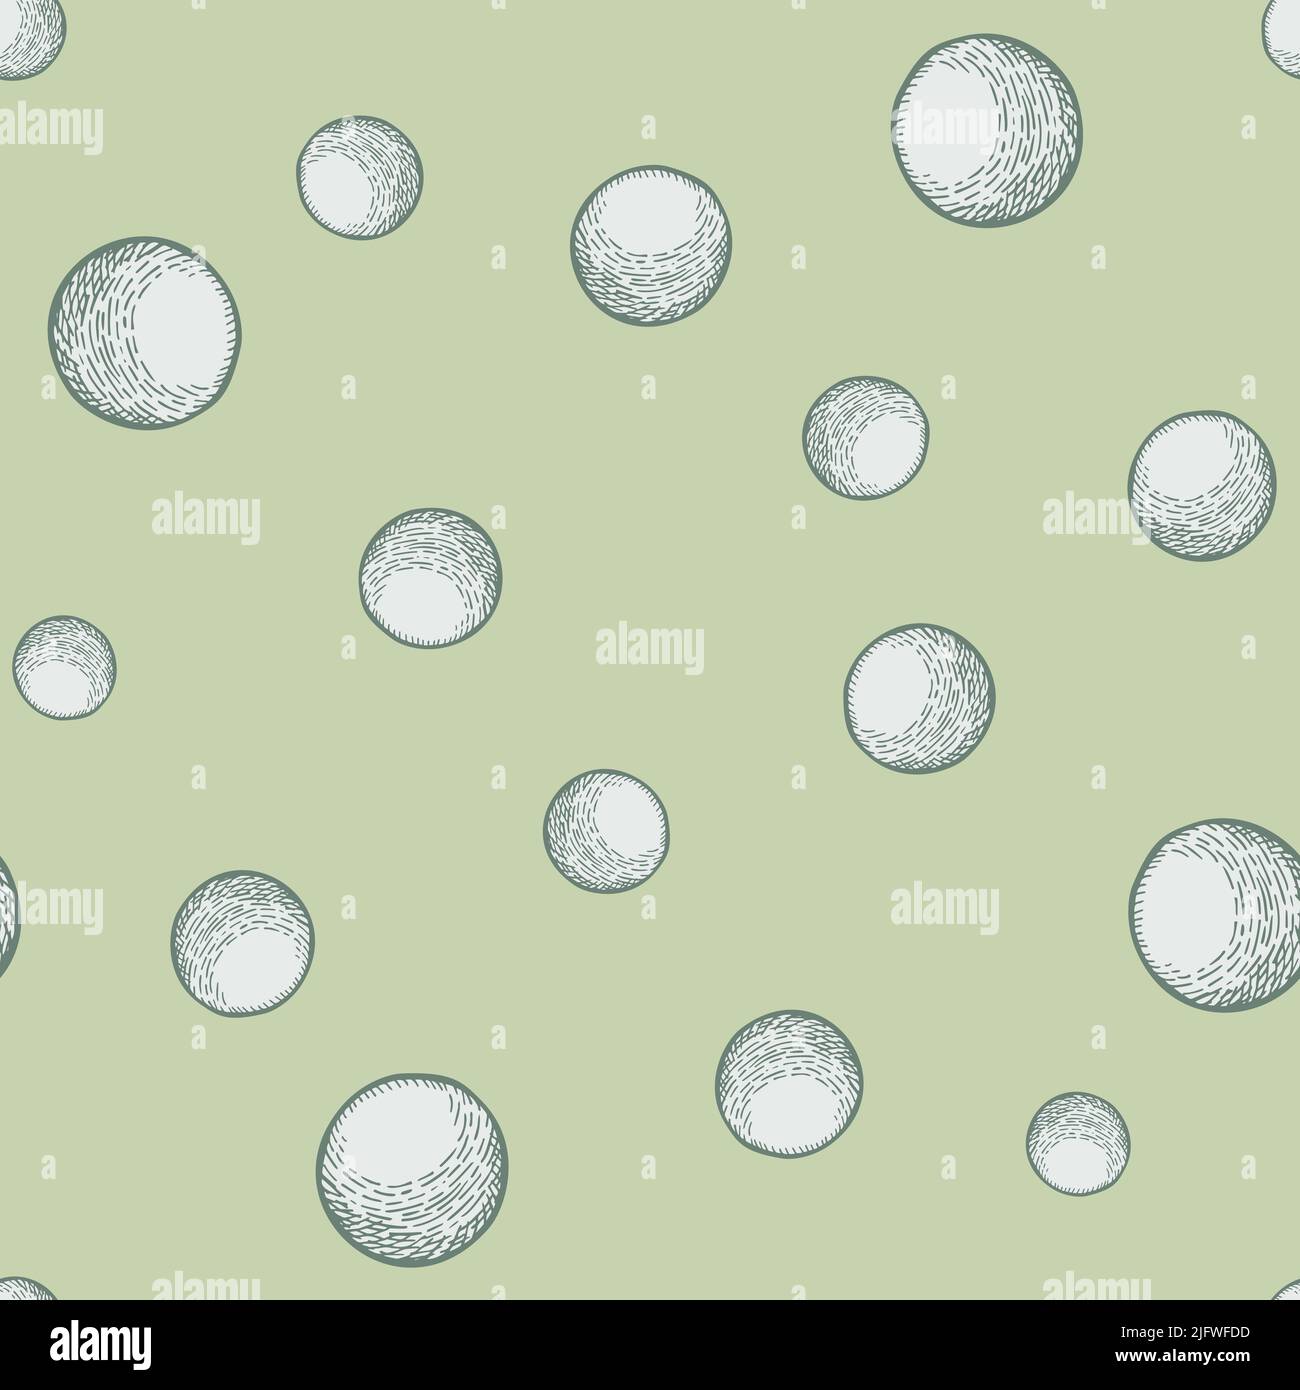 Ball engraved seamless pattern. Vintage sports elements for table tennis hand drawn style. Sketch texture for fabric, wallpaper, textile, print, title Stock Vector